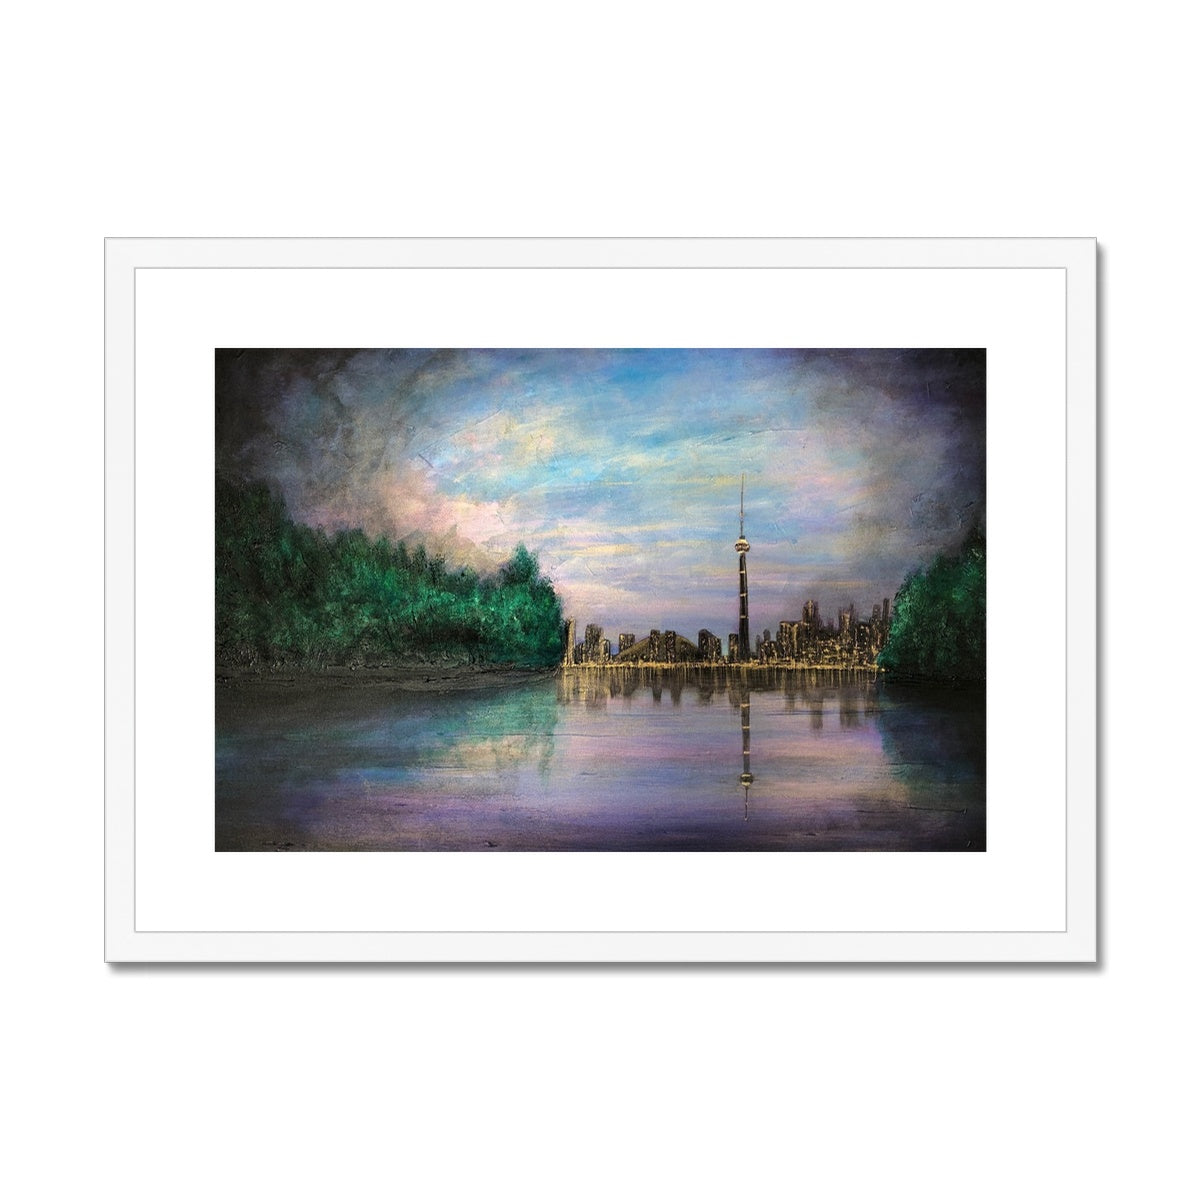 Toronto Last Light Painting | Framed & Mounted Prints From Scotland-Framed & Mounted Prints-World Art Gallery-A2 Landscape-White Frame-Paintings, Prints, Homeware, Art Gifts From Scotland By Scottish Artist Kevin Hunter